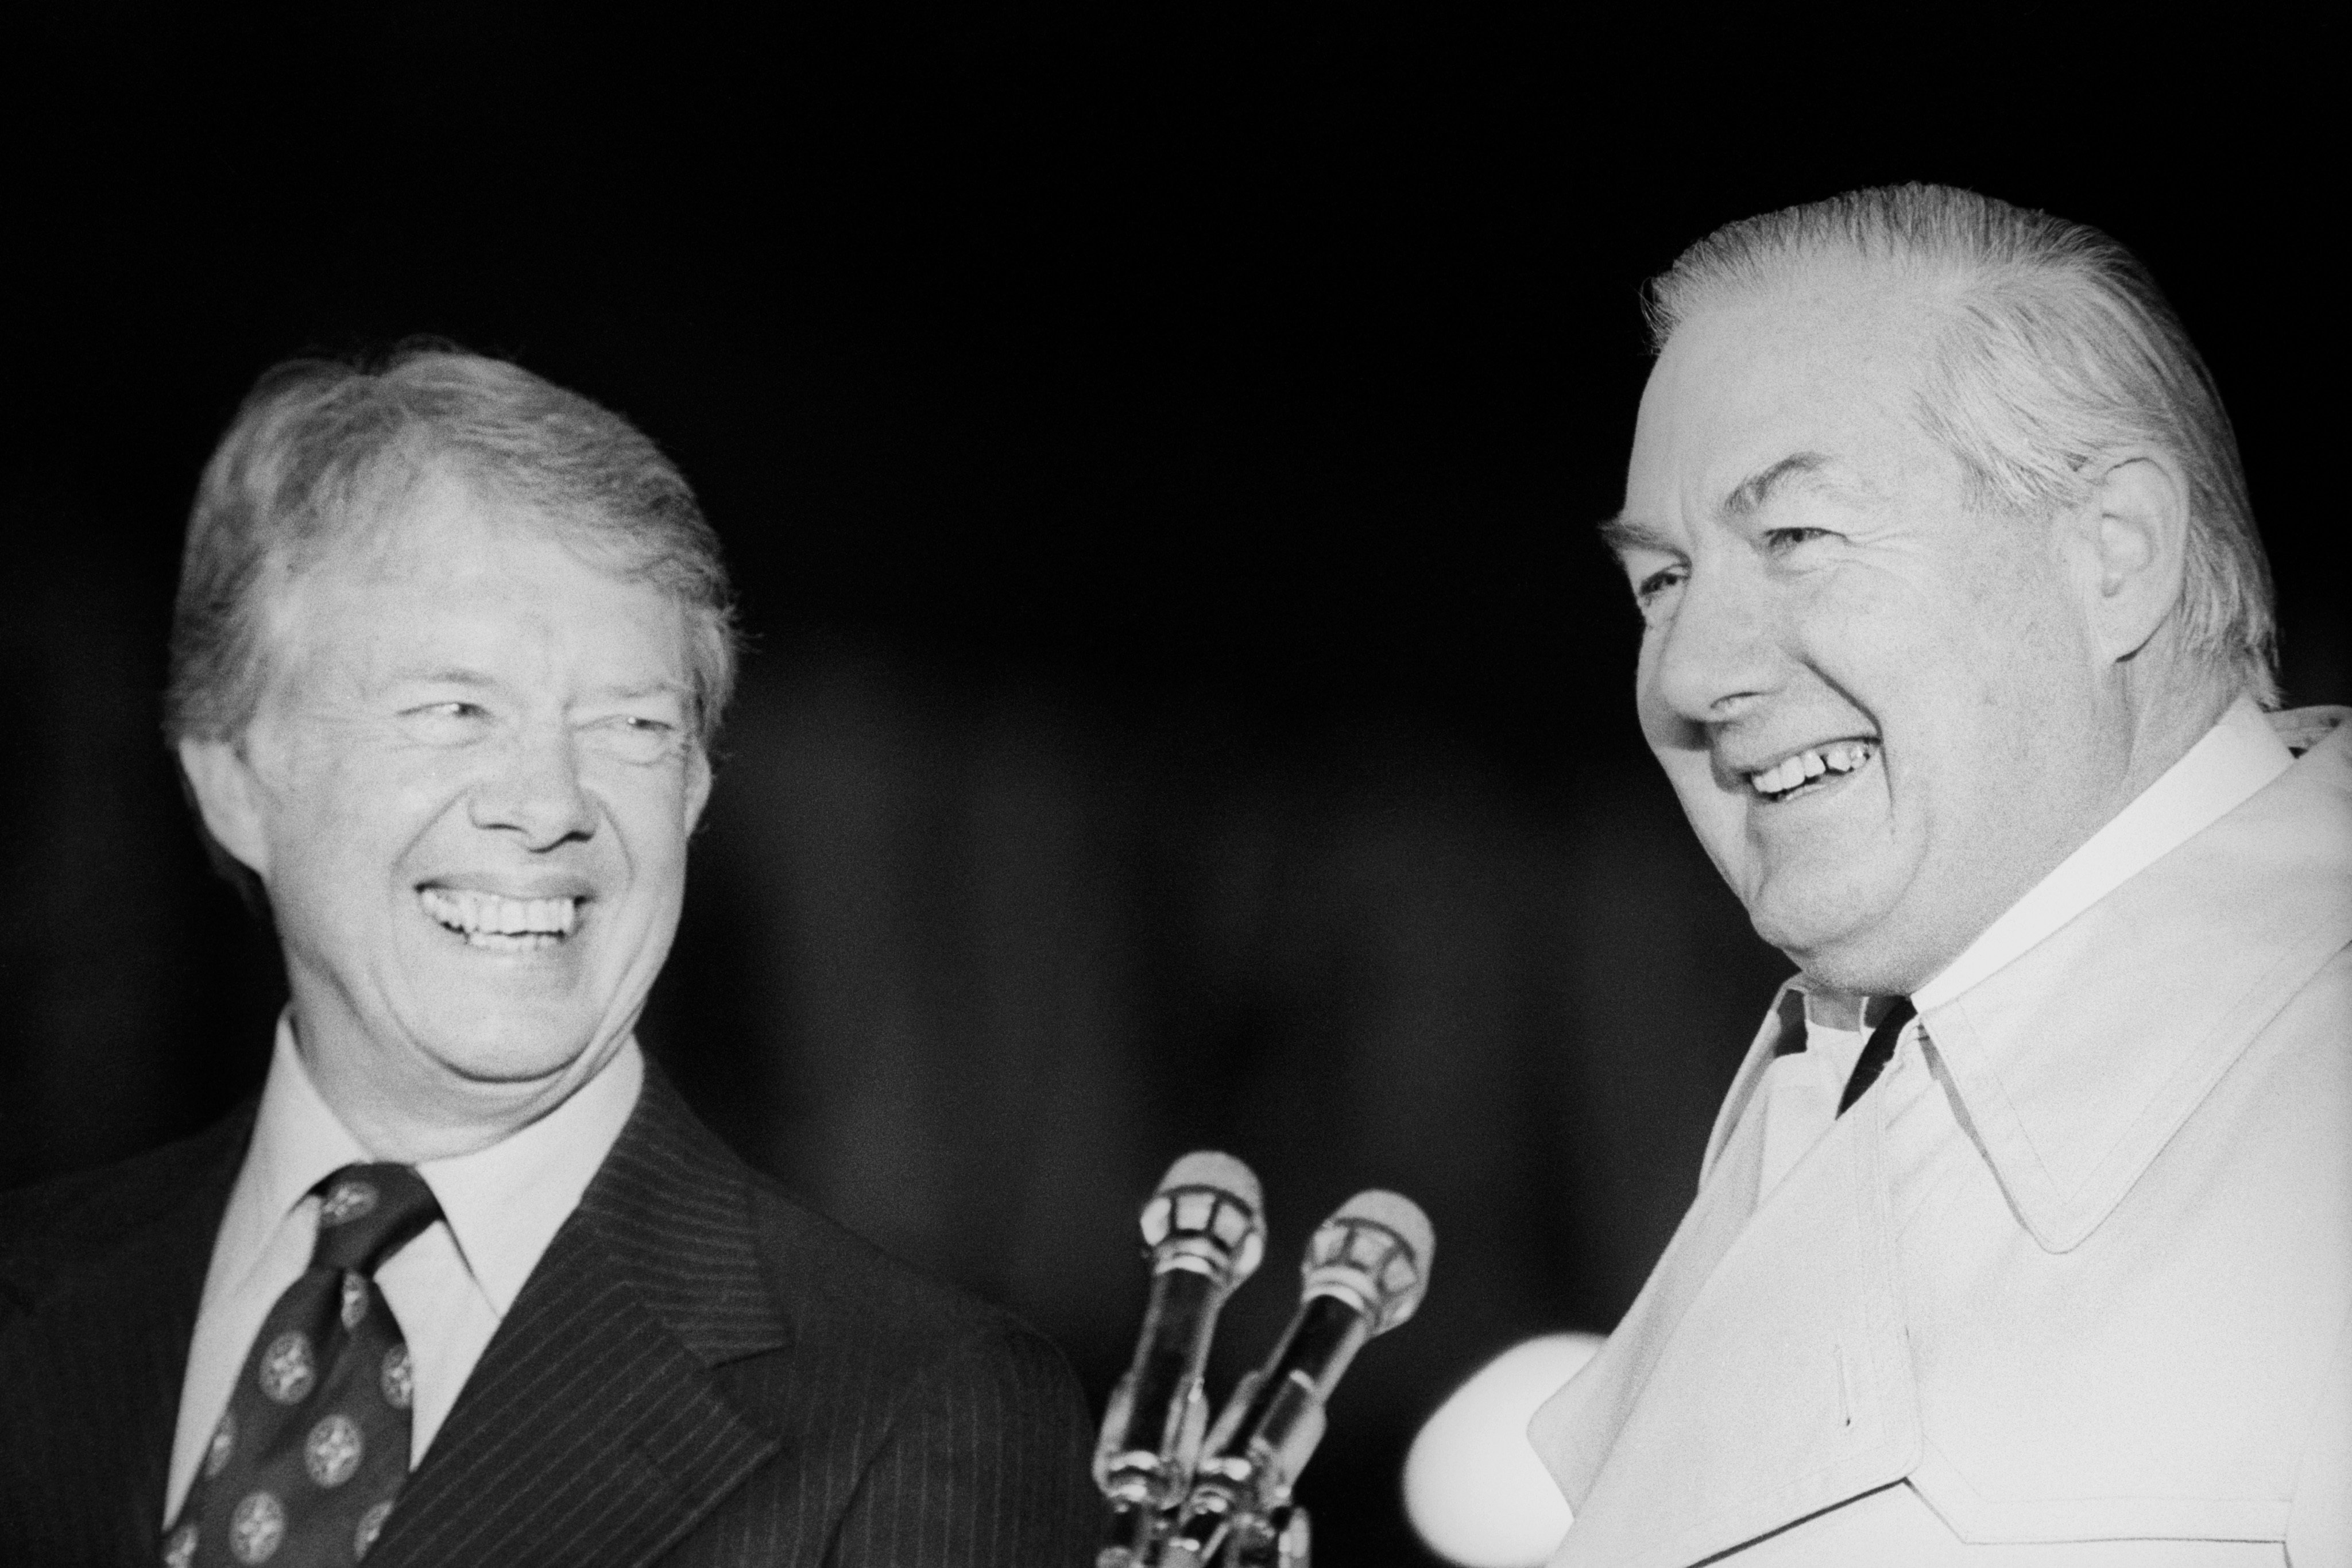 Ex-ambassador Peter Jay said of Jimmy Carter (left) and James Callaghan (right): 'There was something special about those two guys... They had a relationship. It was very important'.